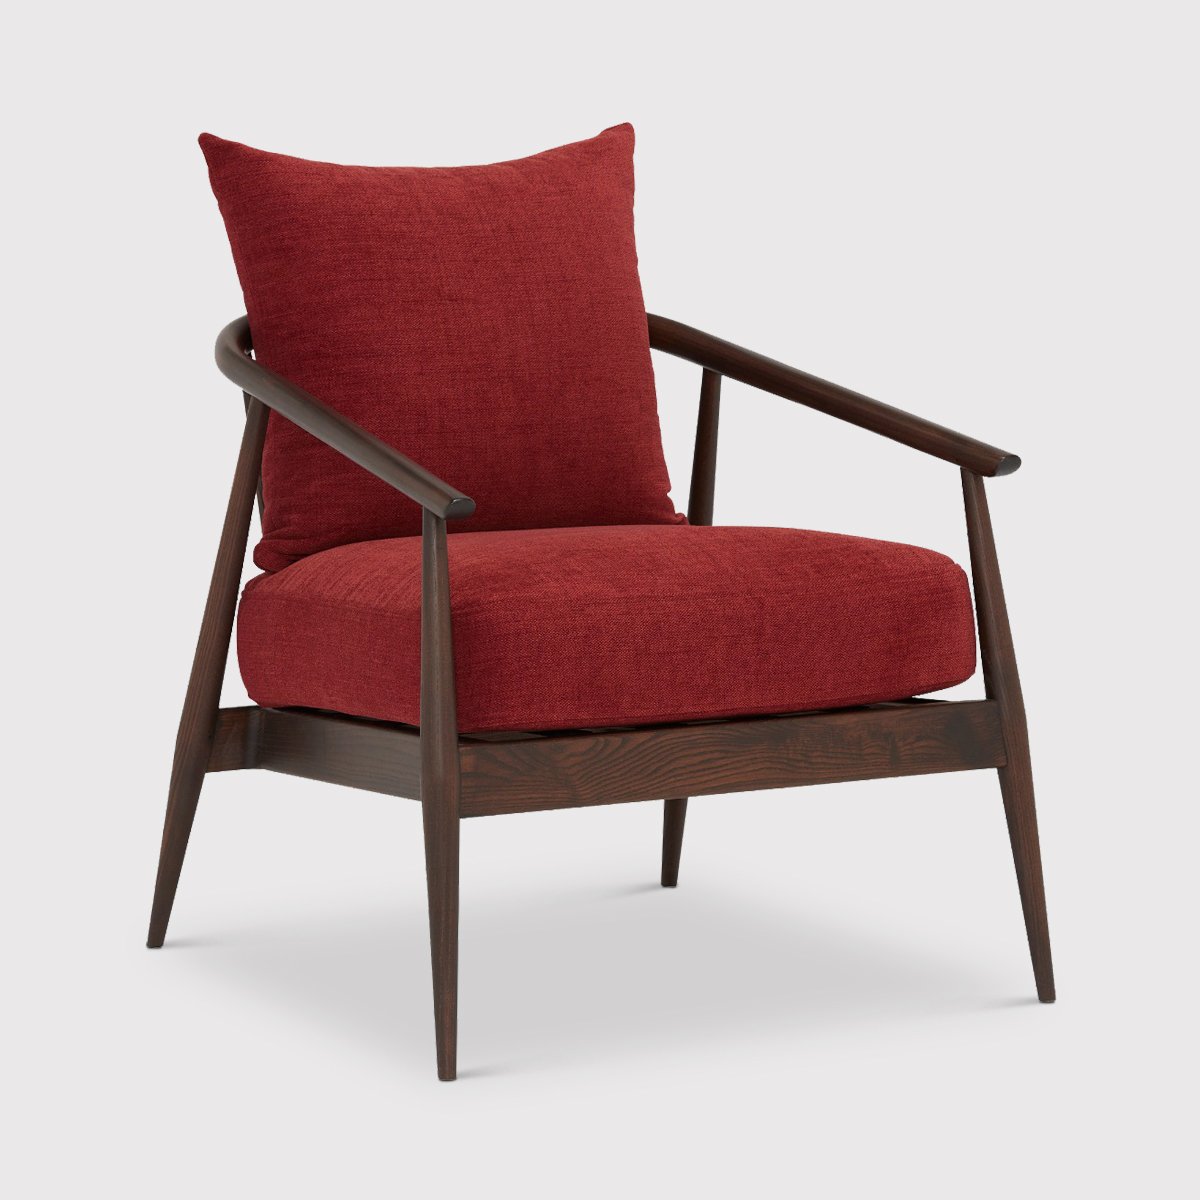 Ercol Aldbury Armchair, Red Fabric | Barker & Stonehouse